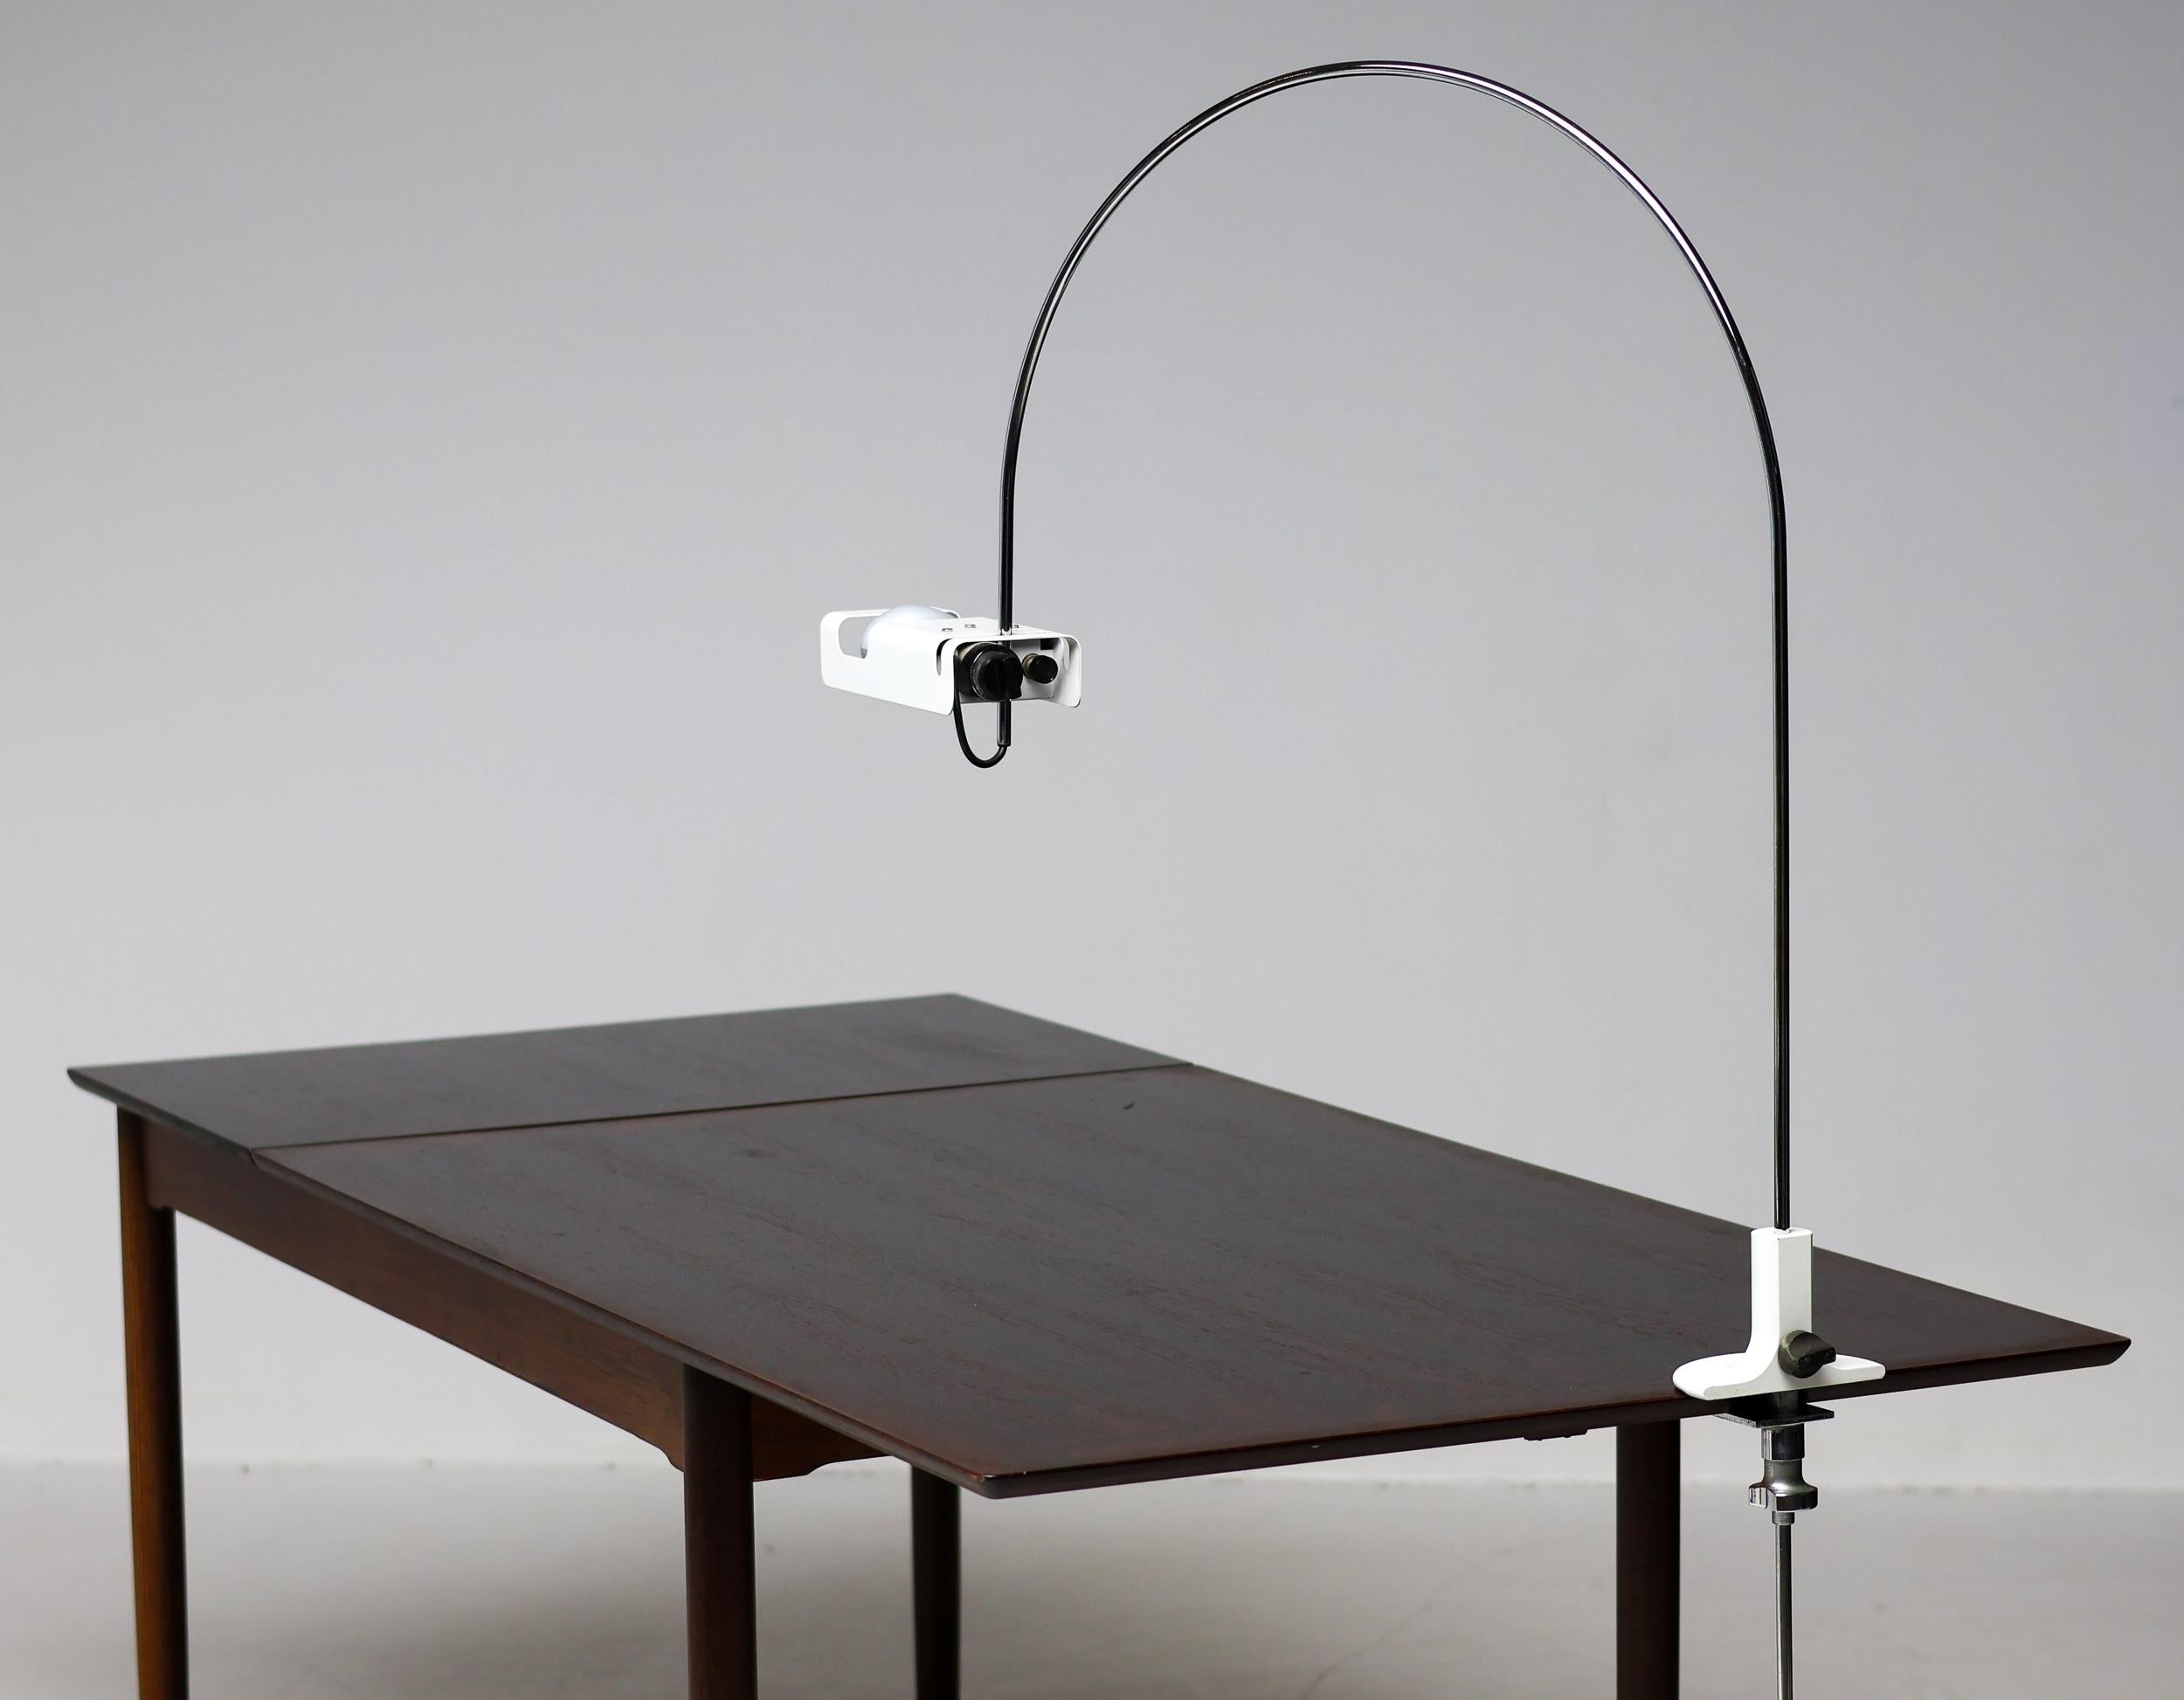 Early Spider arc lamp by Joe Colombo. The 'Spider' lamp series was designed by Joe Colombo in 1965 for Oluce, Italy, A series of floor and table lamps with enameled sheet metal reflector purposely designed to take a special horizontal spot light